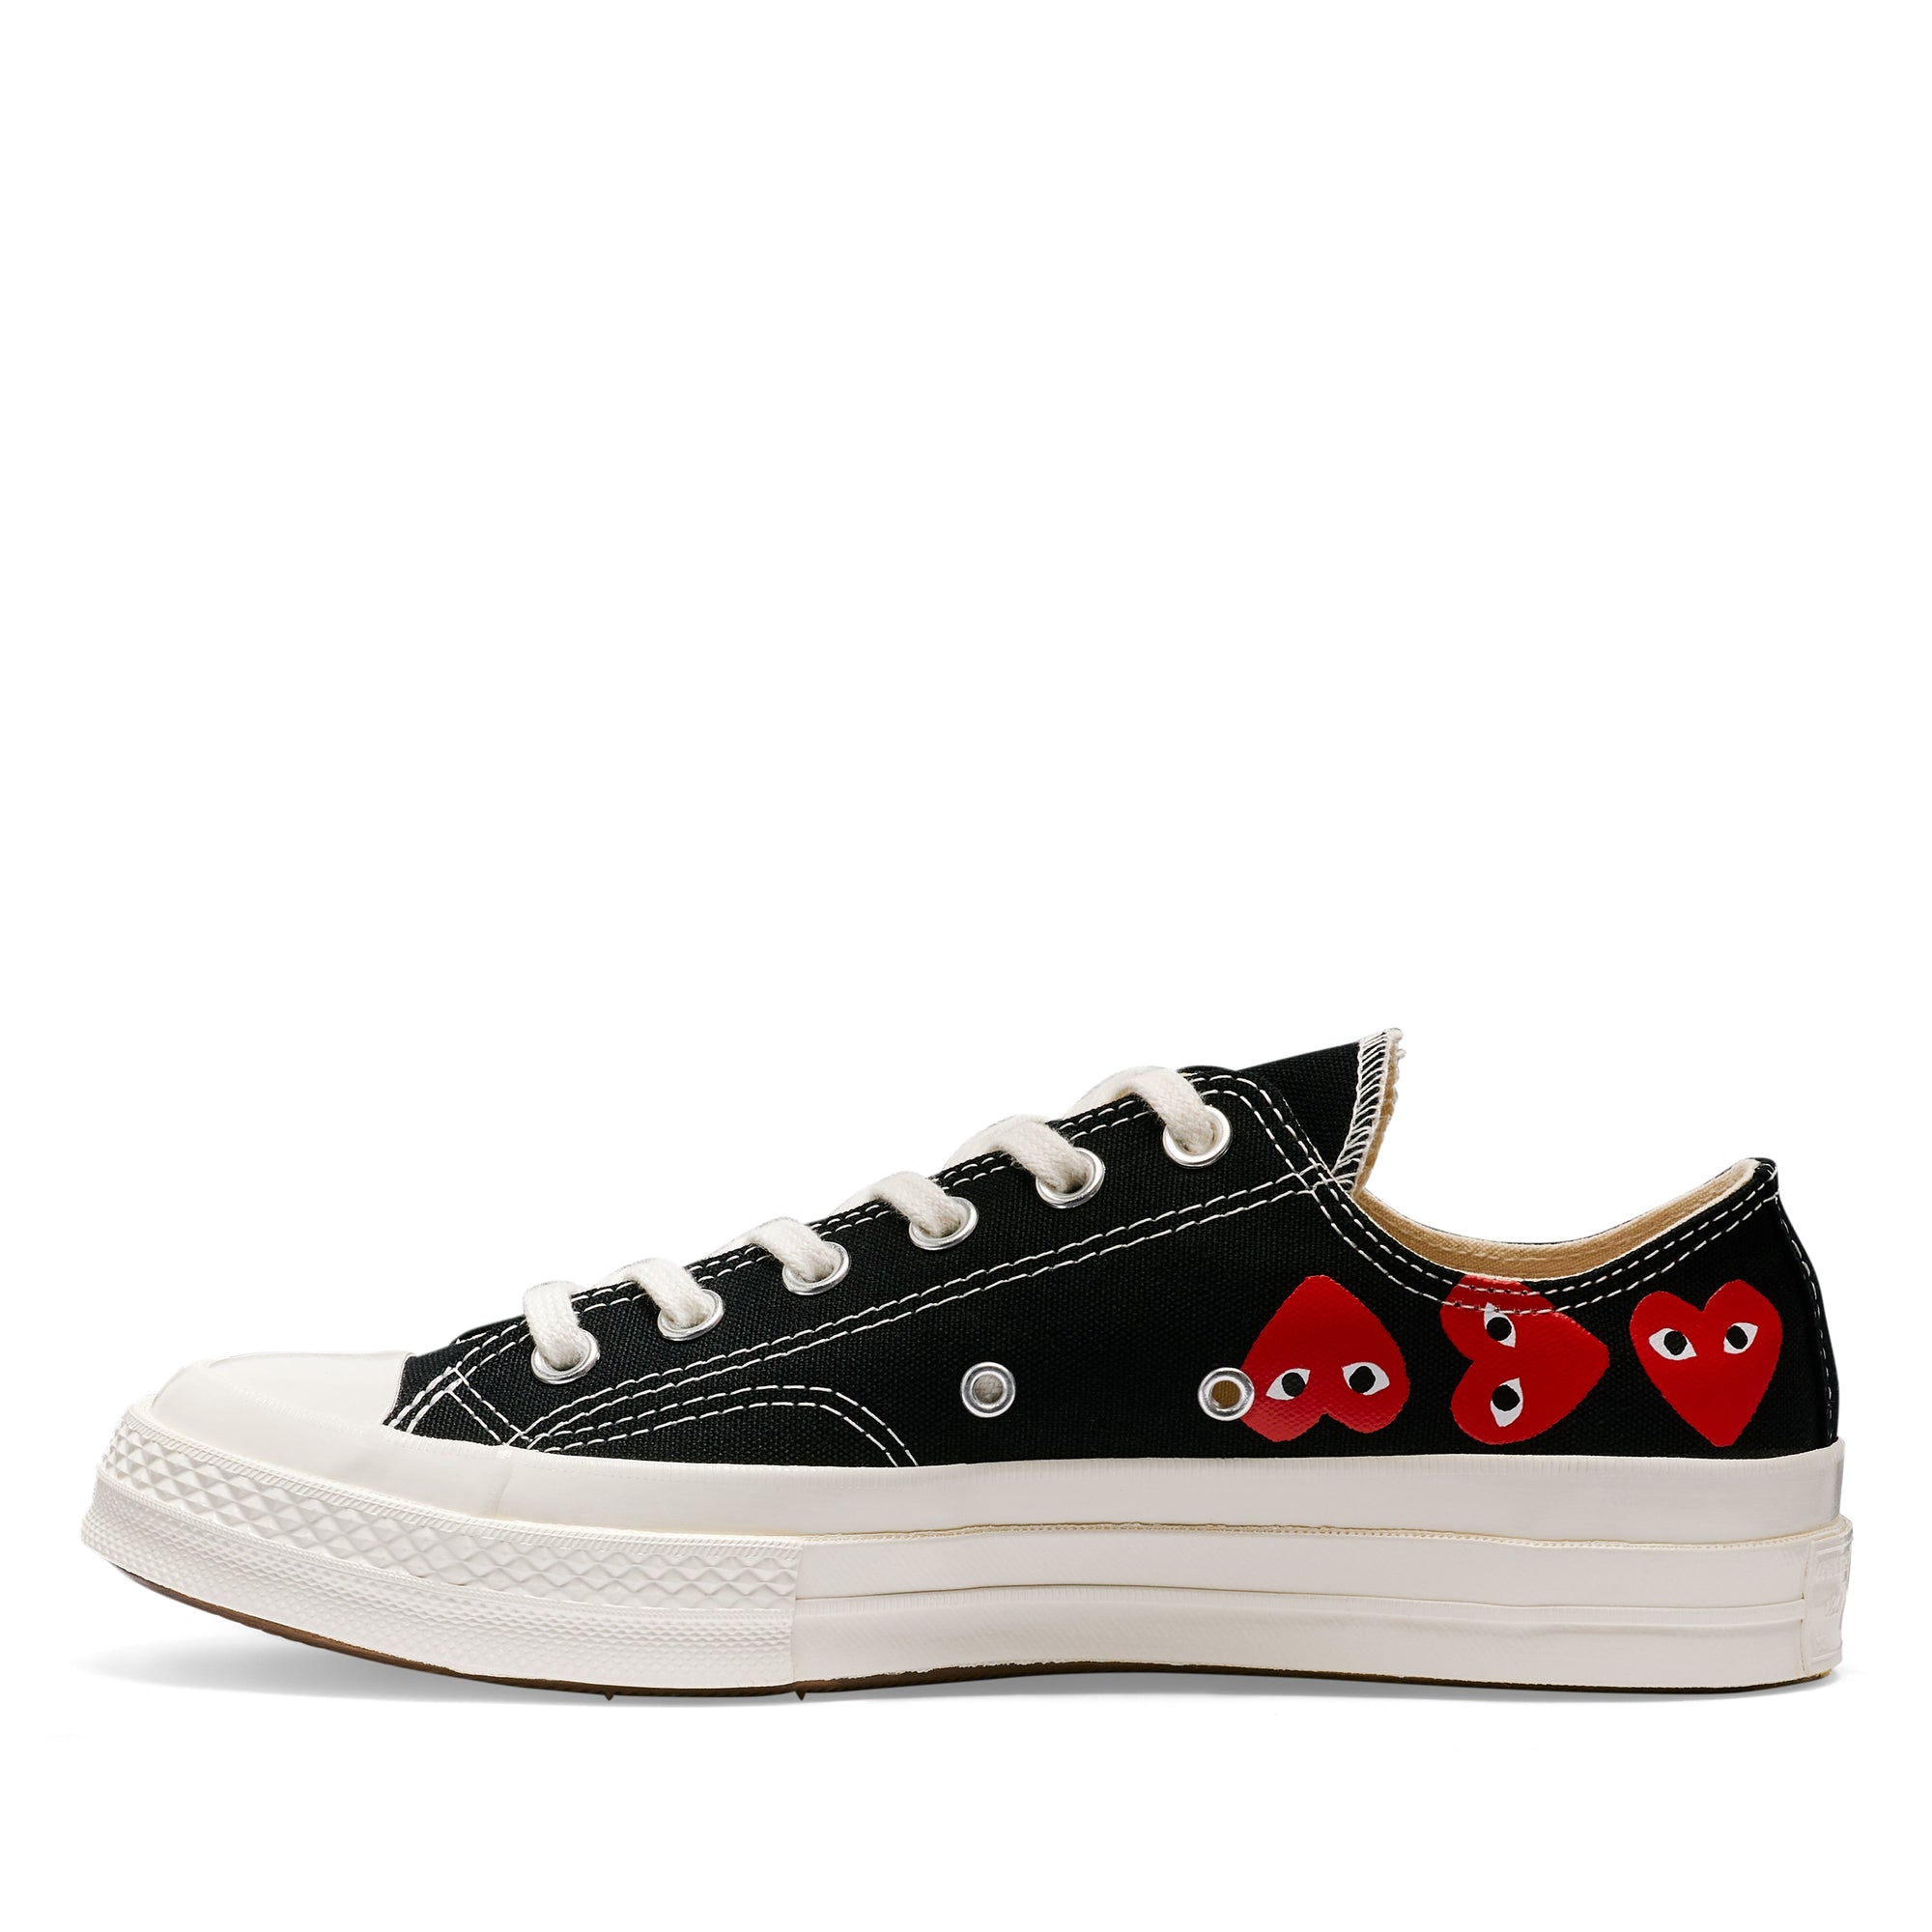 Play Converse - Multi Red Heart Chuck Taylor All Star '70 Low Sneakers - (Black) view 2